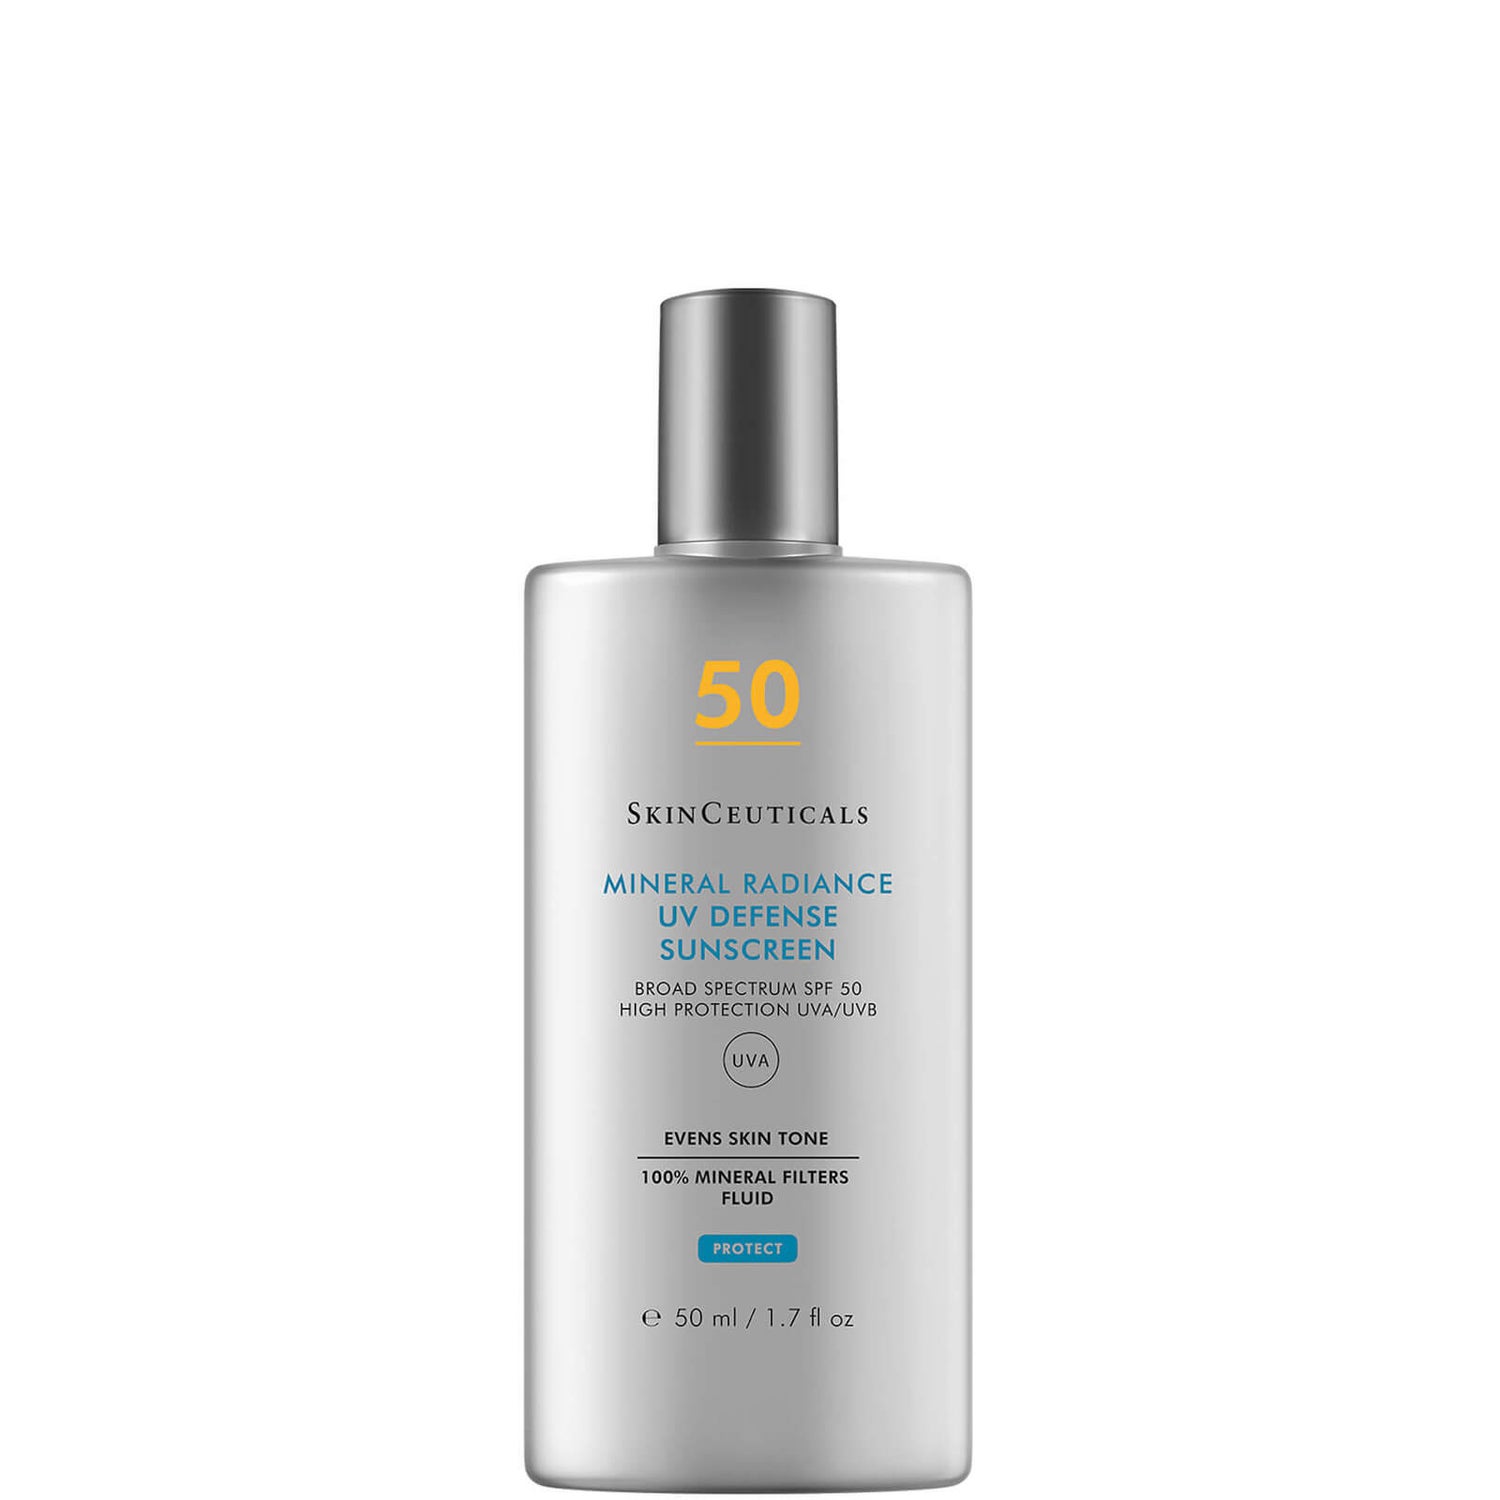 SkinCeuticals Mineral Radiance UV Defense SPF50 Sunscreen Protection 50ml